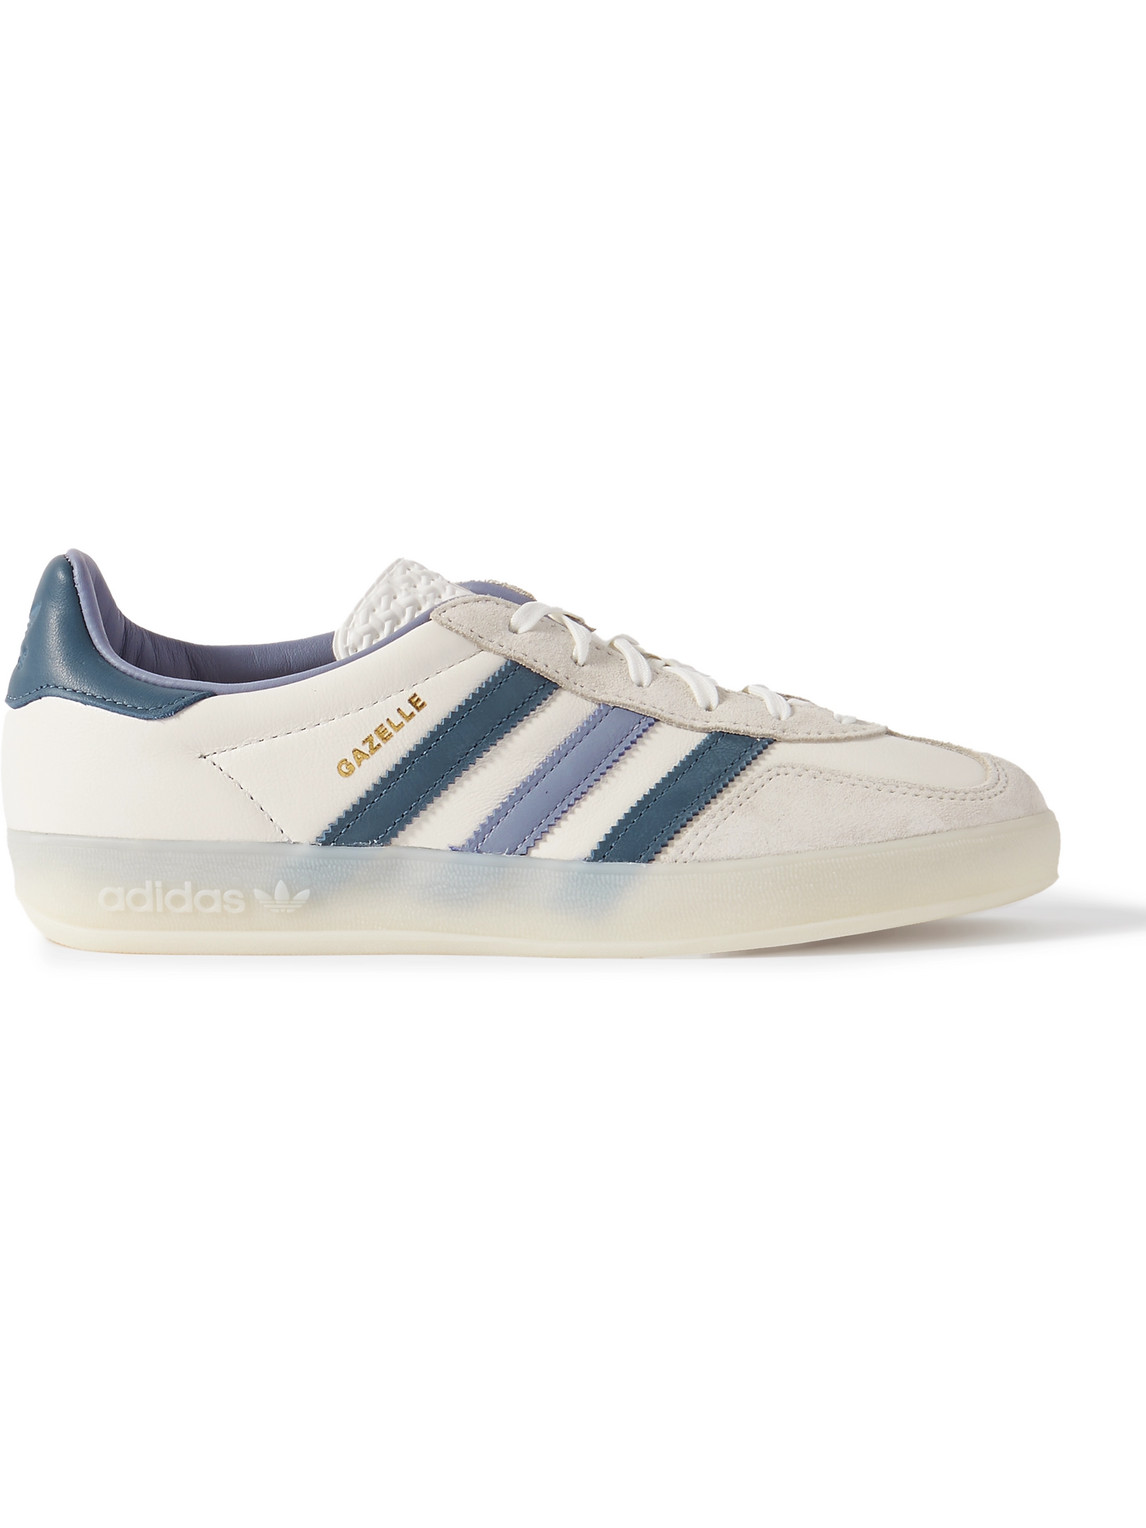 Adidas Originals Gazelle Indoor Leather And Suede Sneakers In White